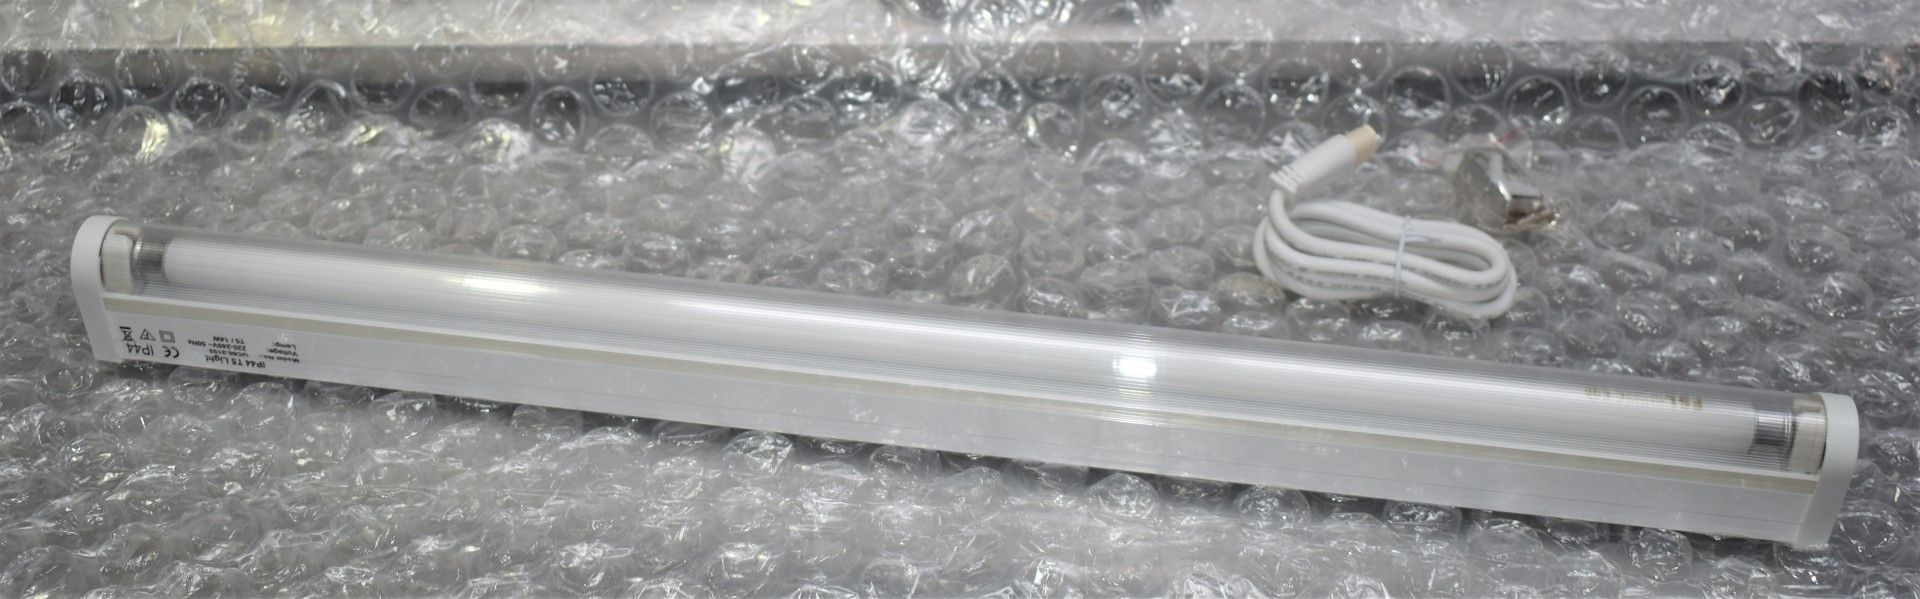 10 x Bathroom Light Fittings - IP44 Waterproof T5 14w Fluorescent Lights With Built-In Electronic